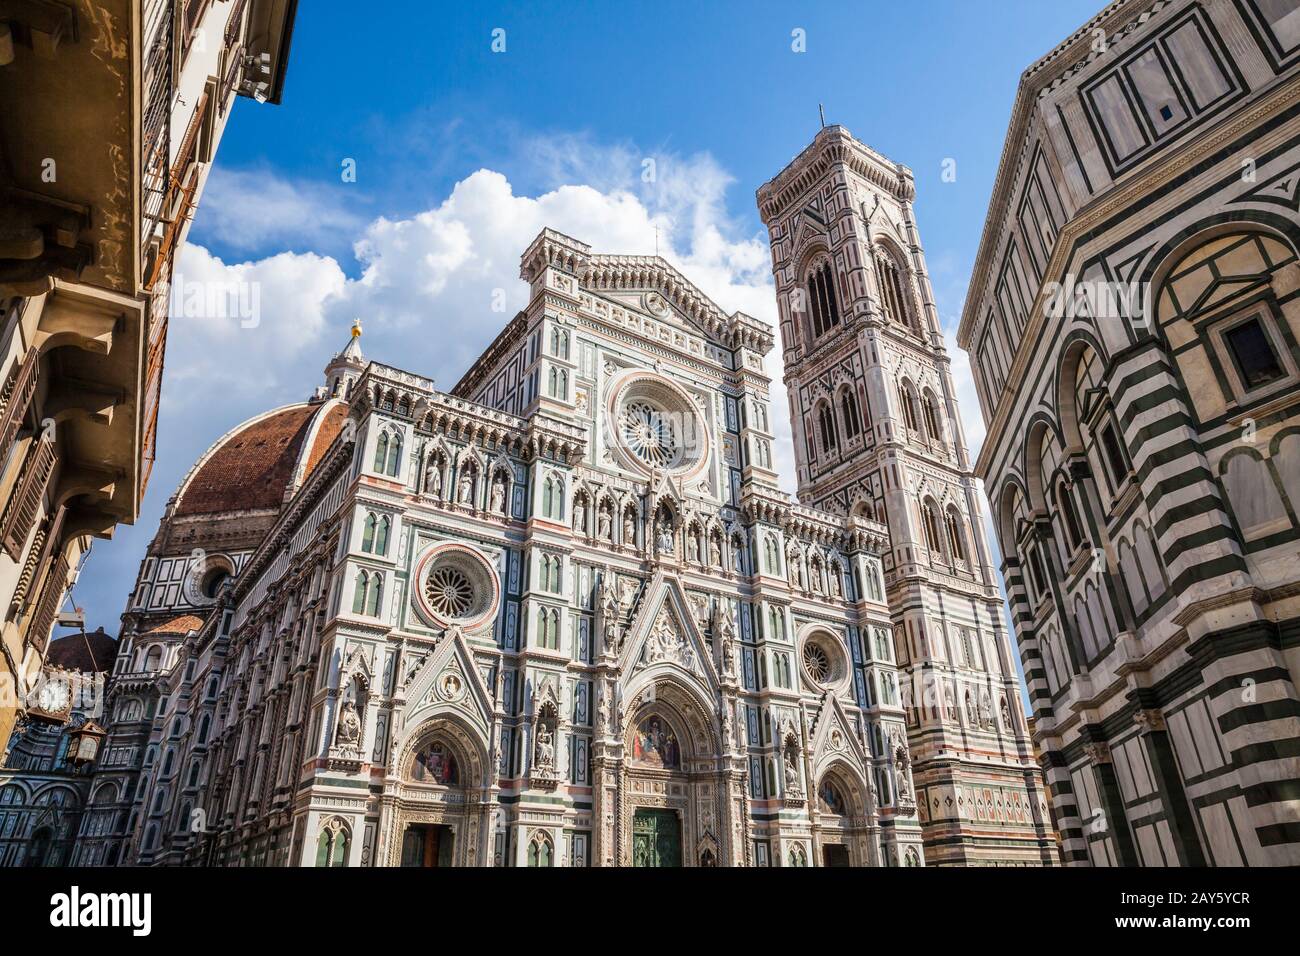 The Duomo / Cathedral of Santa Maria del Fiore in Florence, Italy. Stock Photo